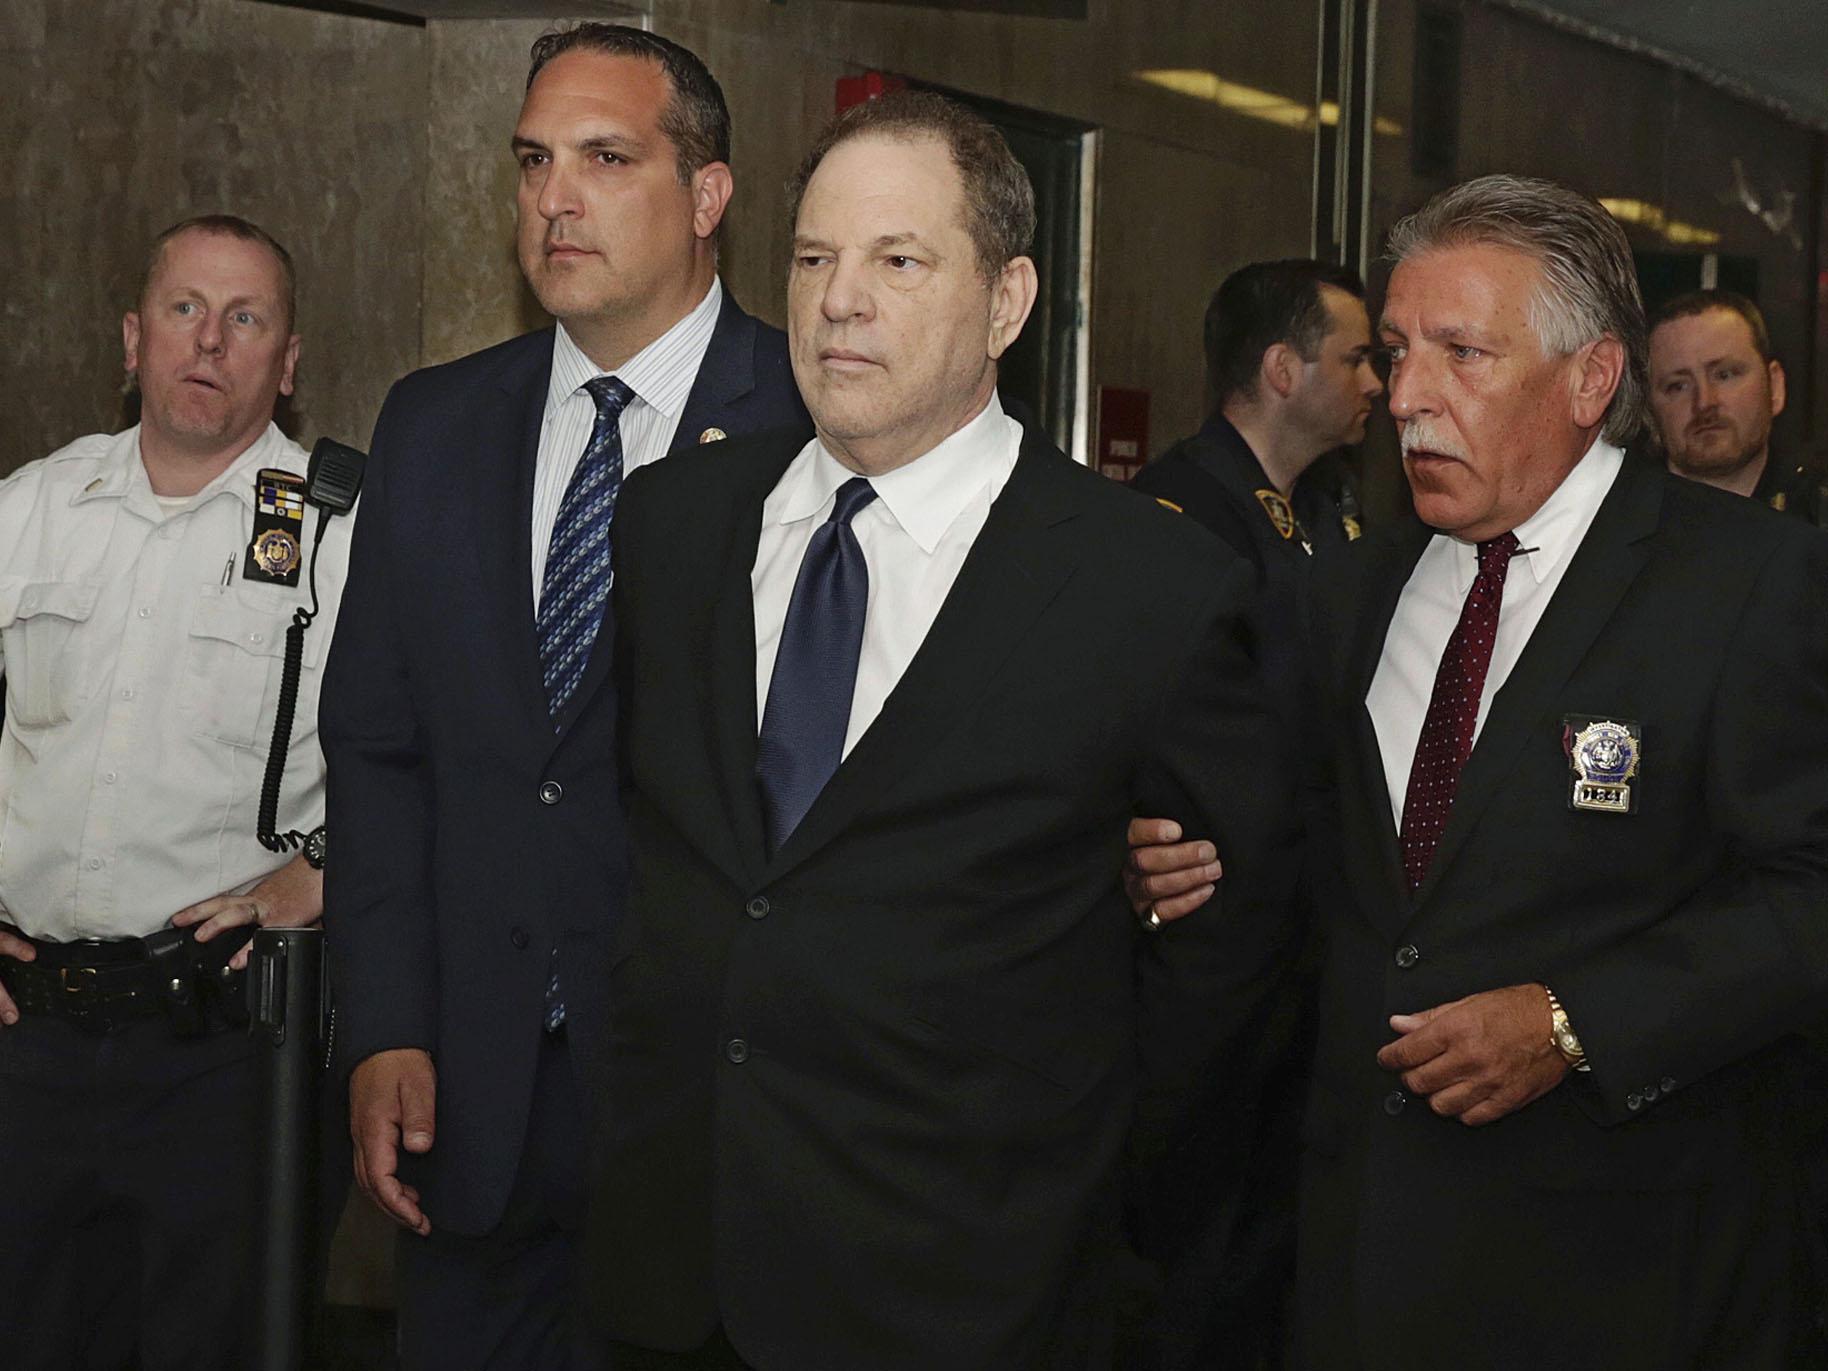 In this July 9, 2018 file photo, Harvey Weinstein is escorted in handcuffs to a courtroom in New York